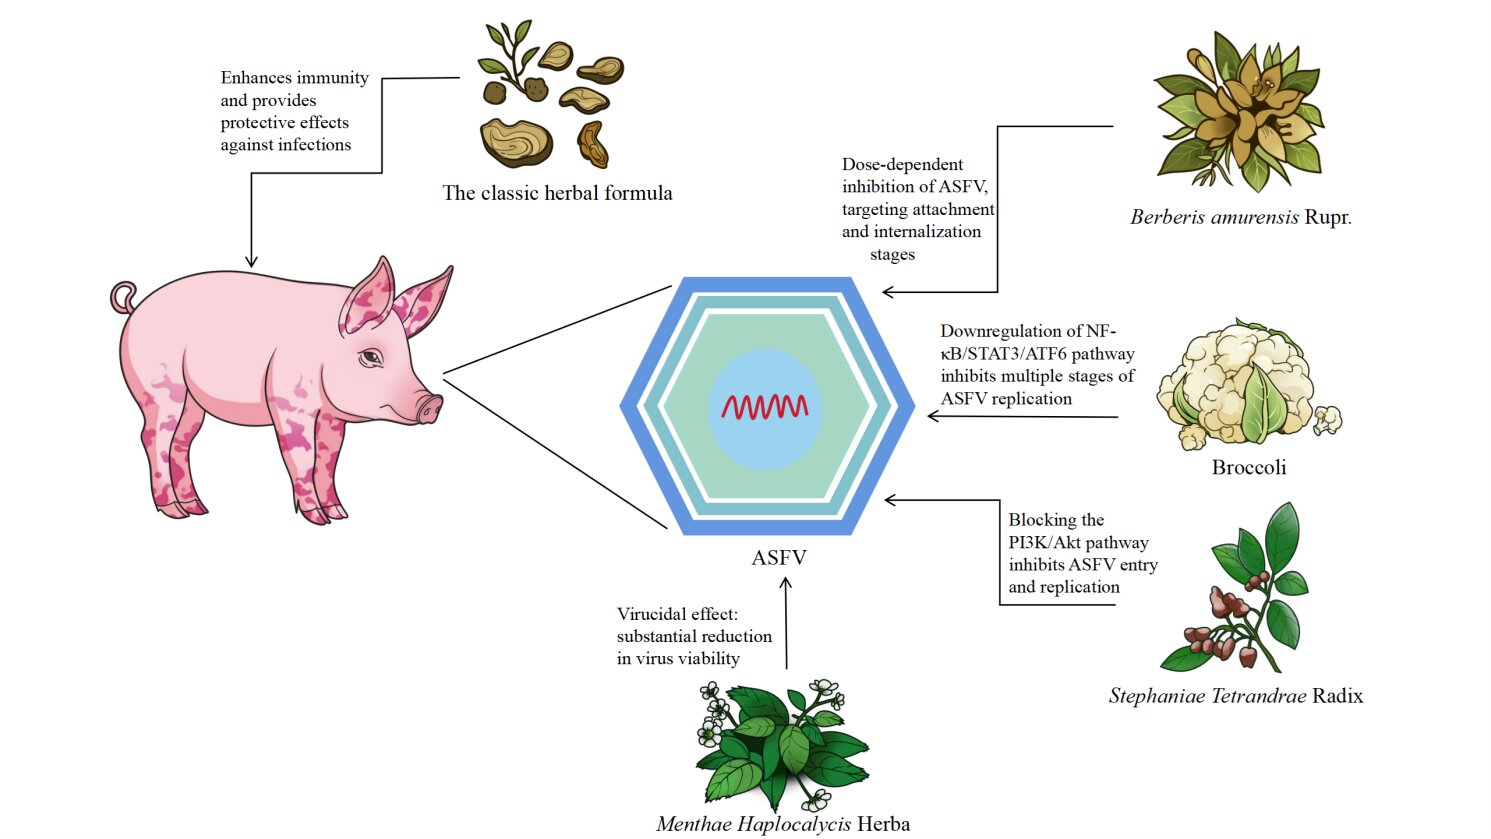 Ancient remedies for modern woes: Traditional Chinese medicine and the fight against African swine fever